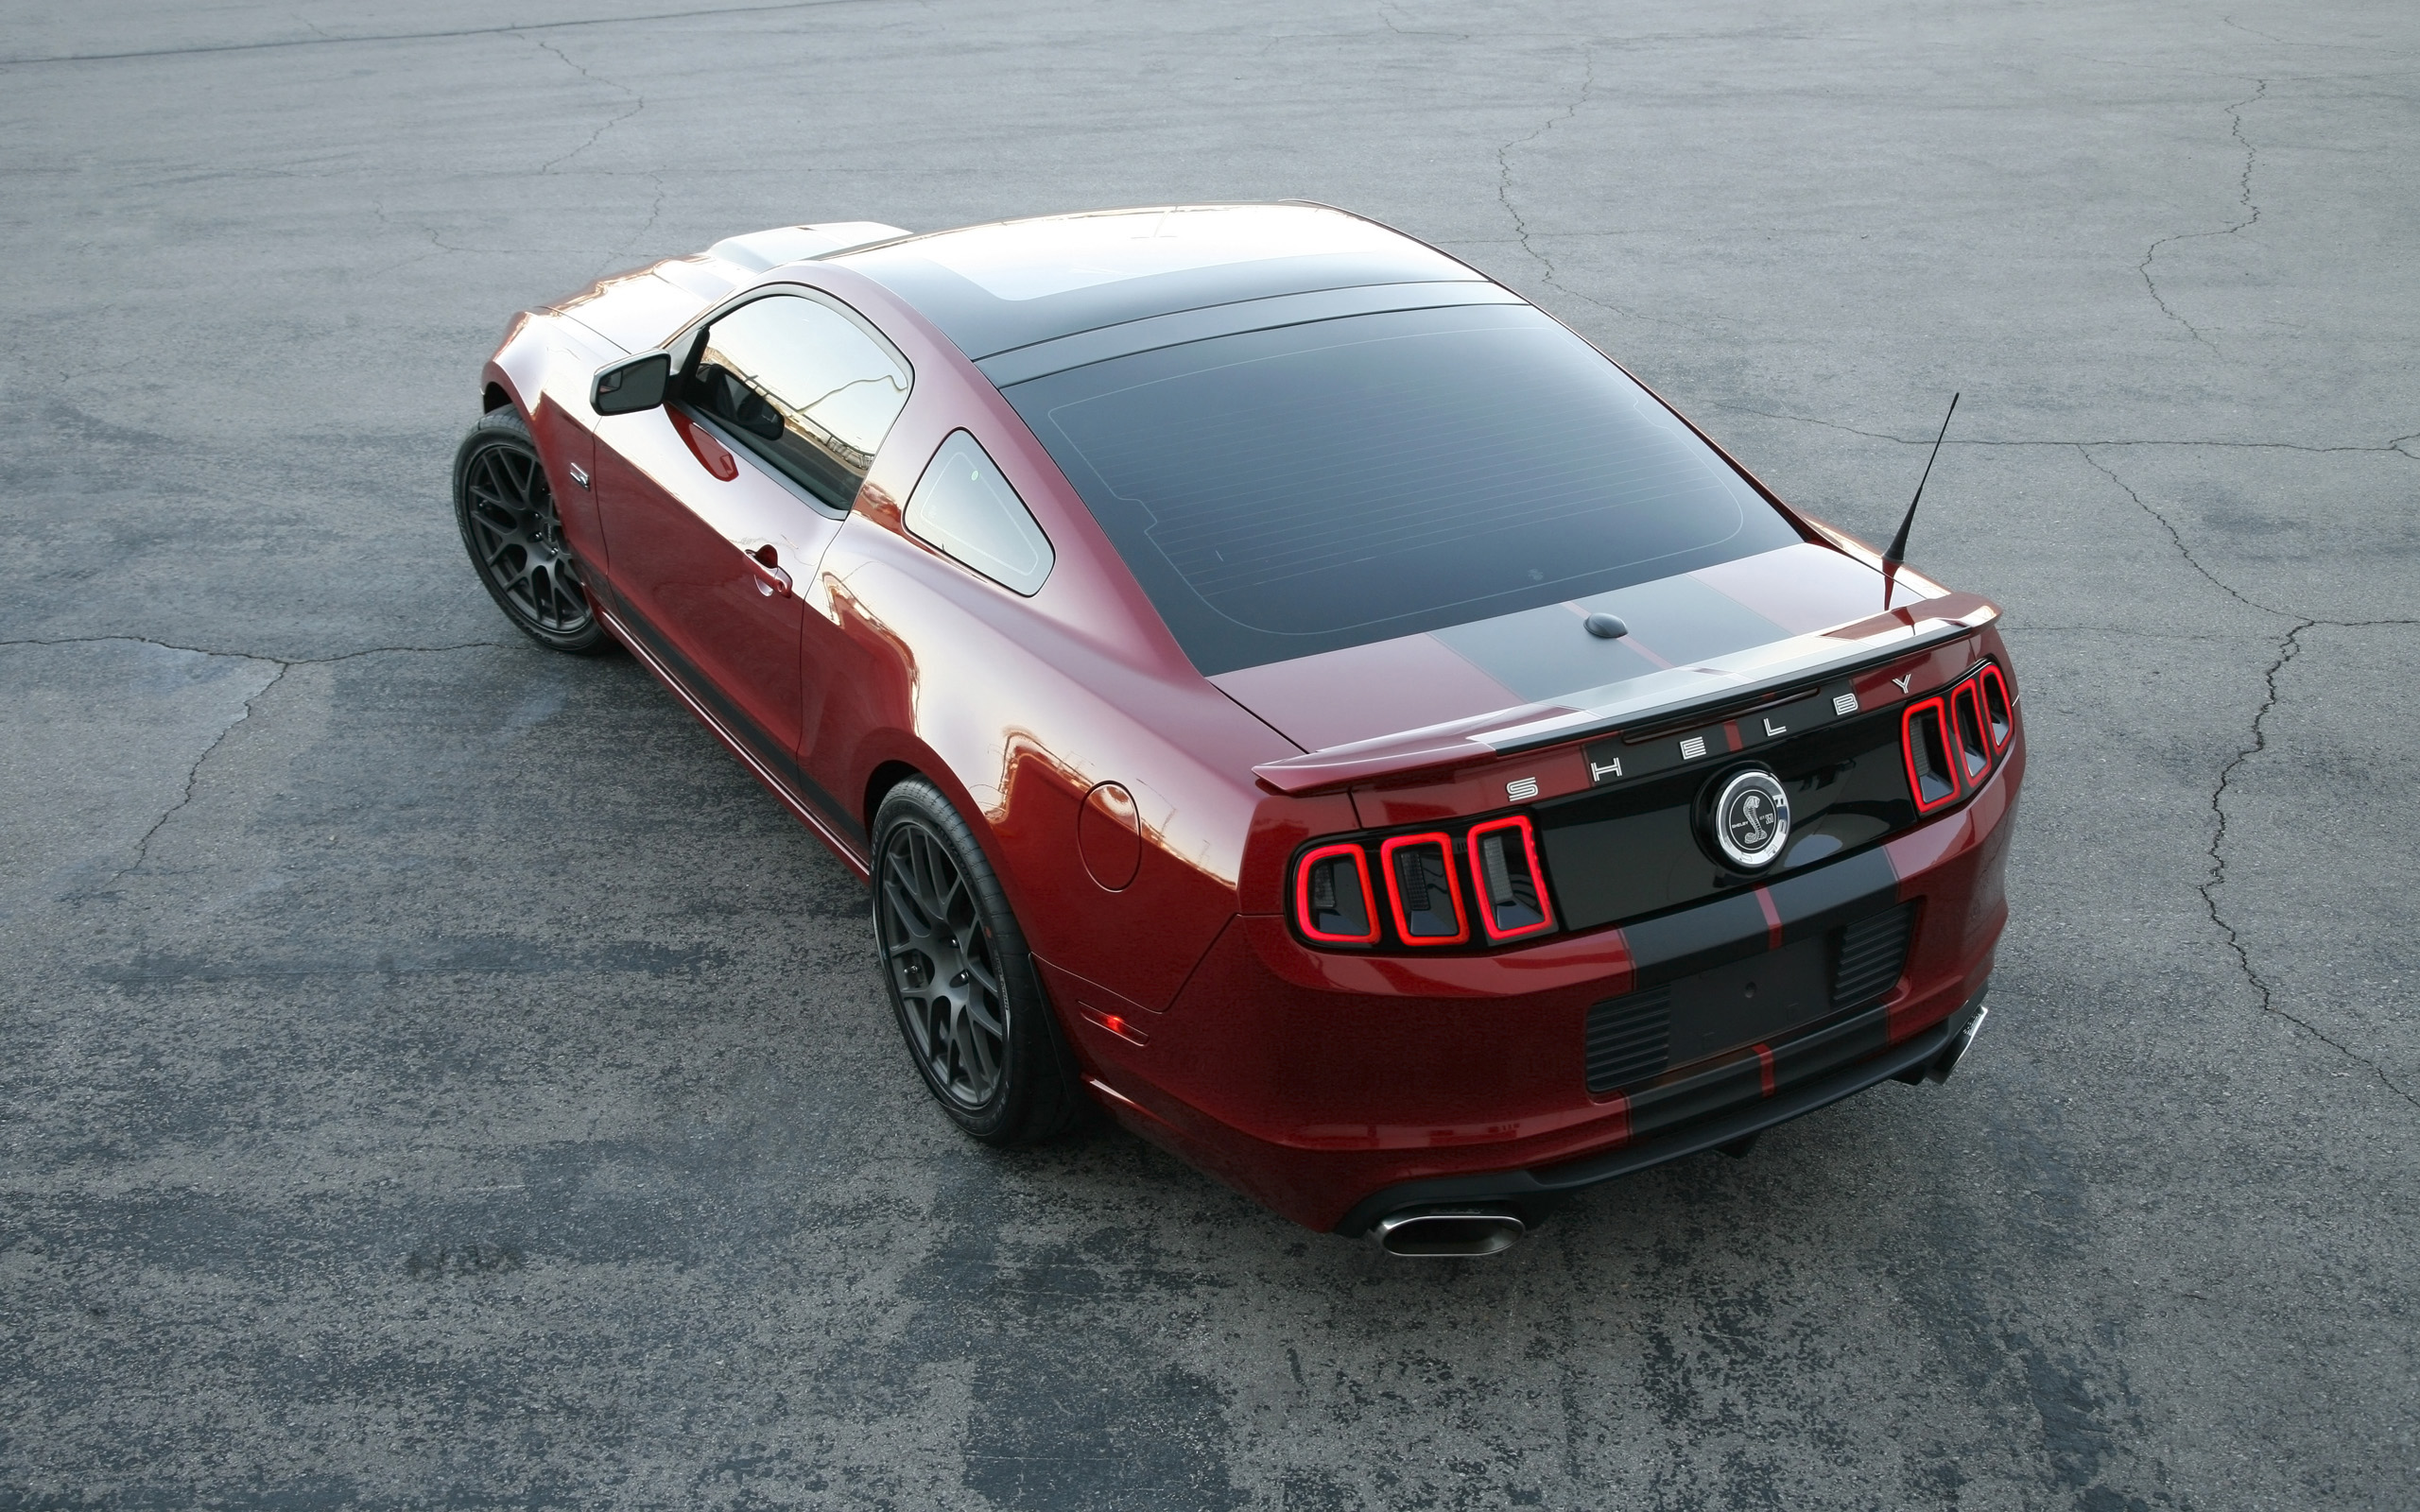 2013, Shelby, Gt350, Ford, Mustang, Supercar, Musle Wallpaper